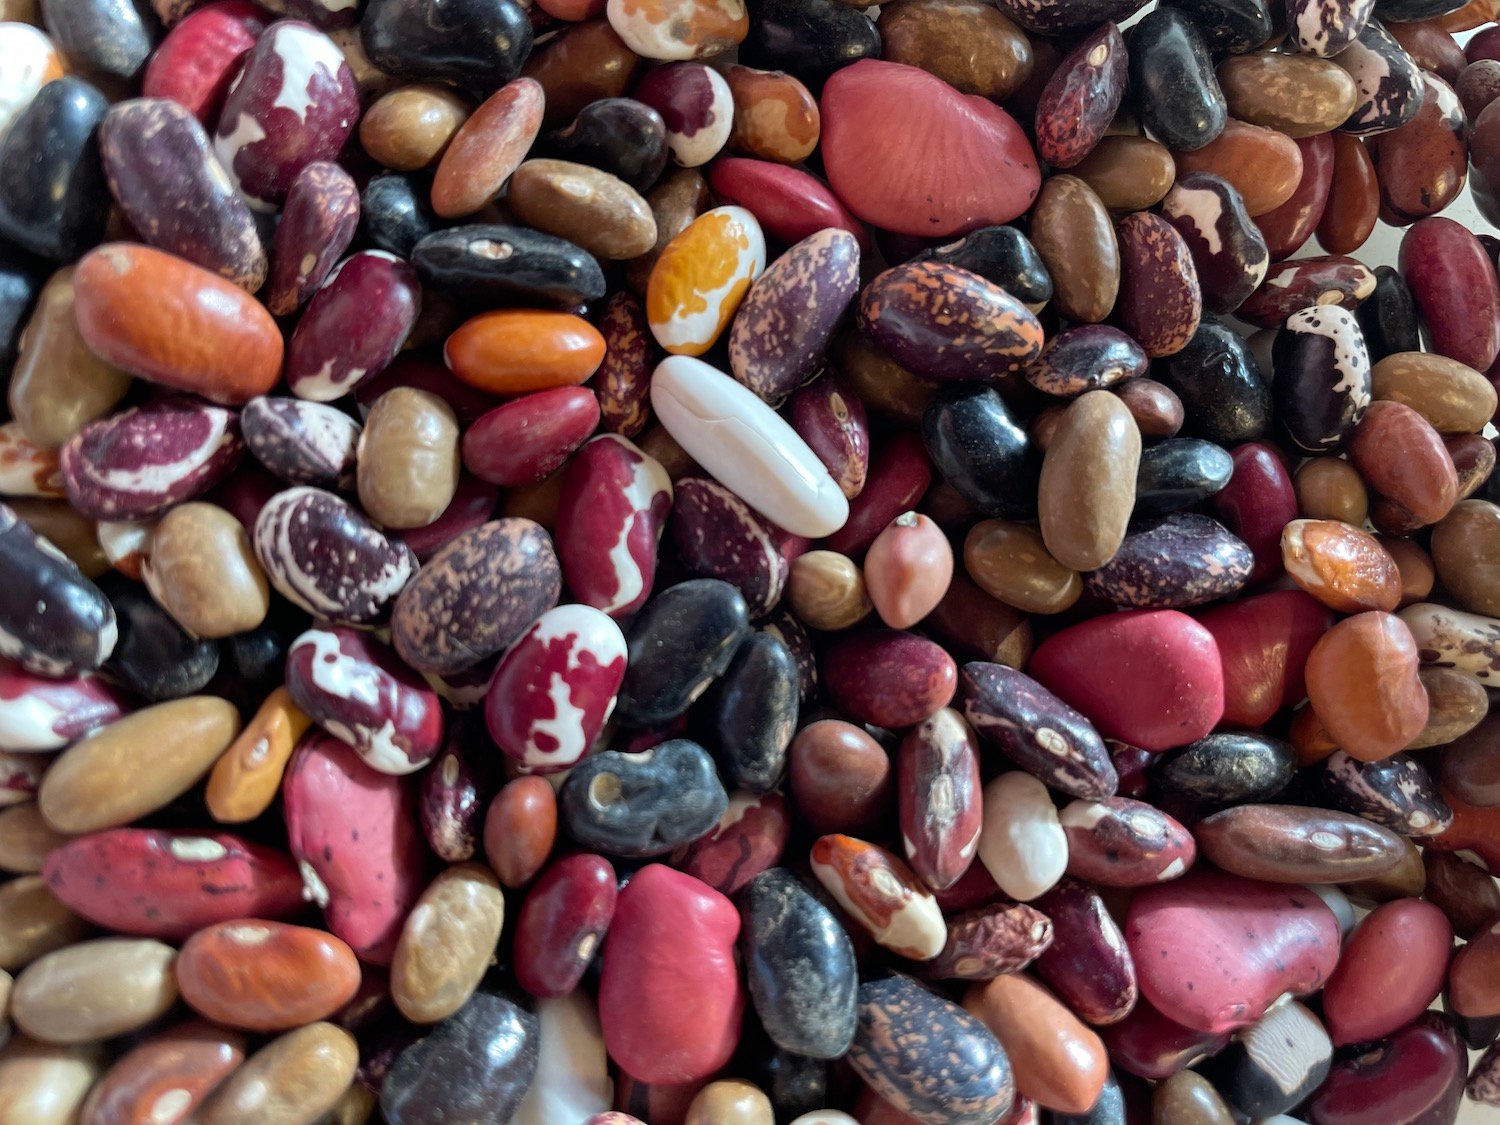 San Diego farm Rio Del Rey Heirloom Farms reviving heirloom beans from the past